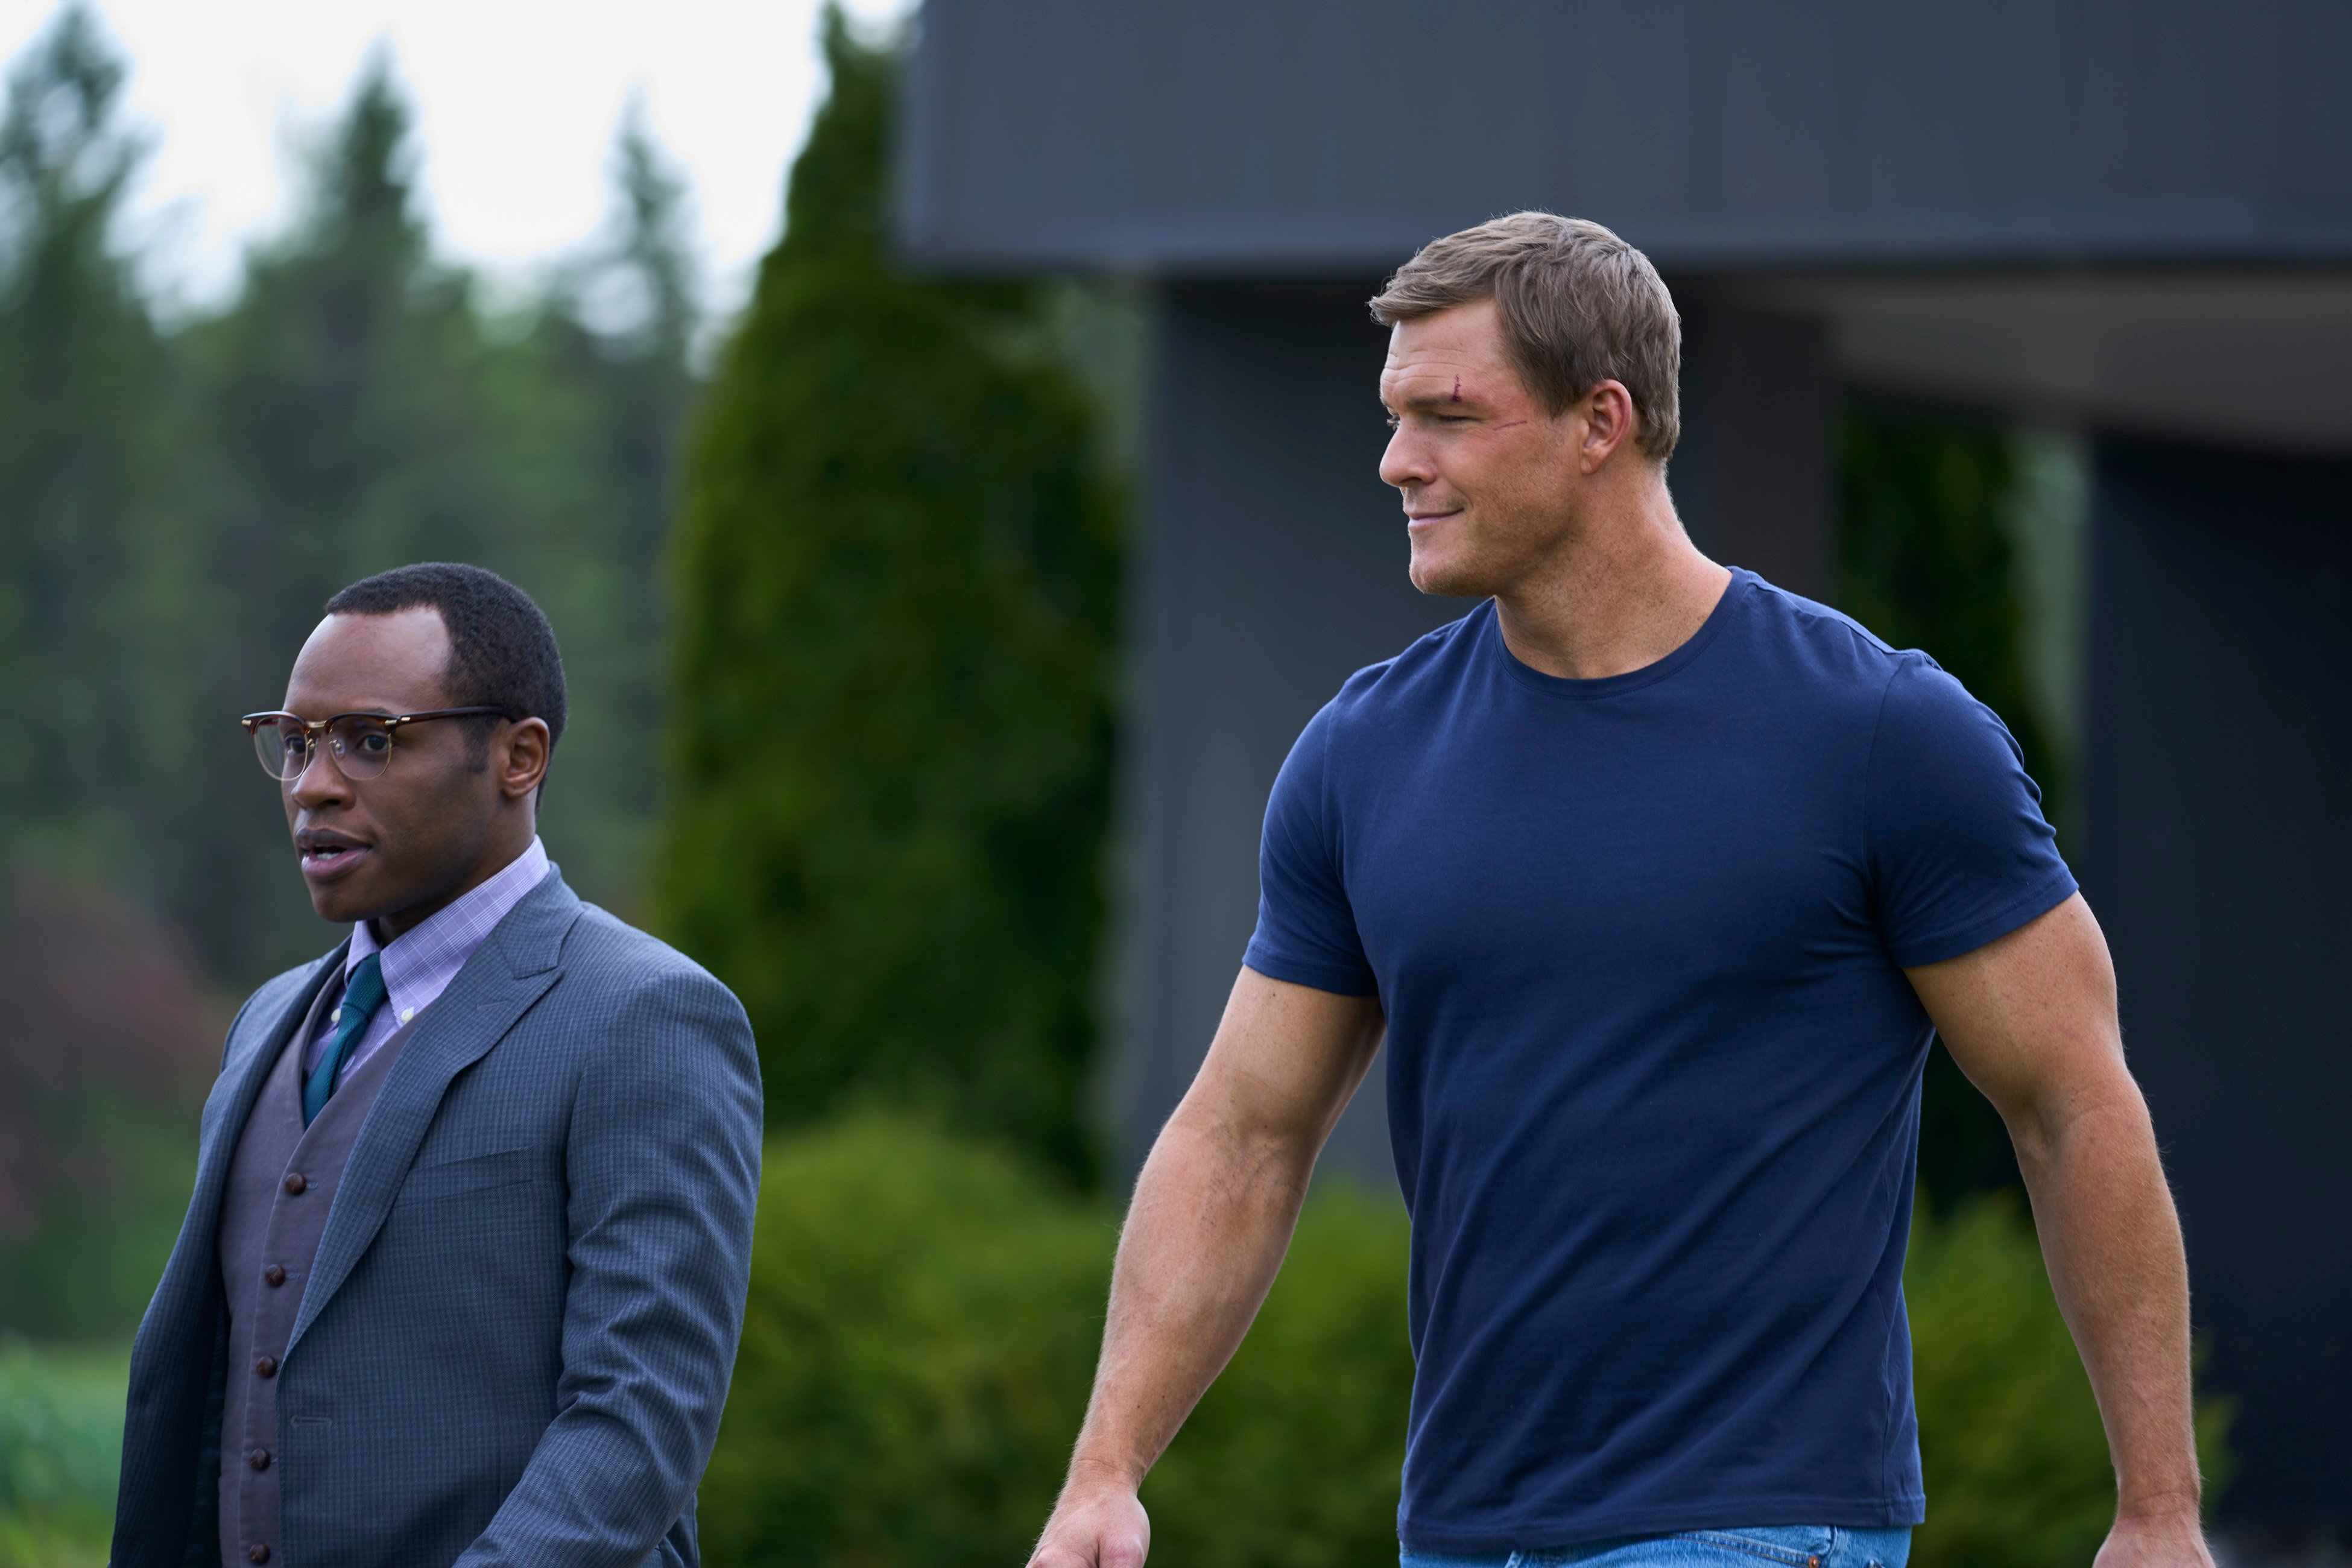 Malcolm Goodwin, wearing a suit, standing next to Alan Ritchson, wearing a blue T-shirt, in an episode of 'Reacher'